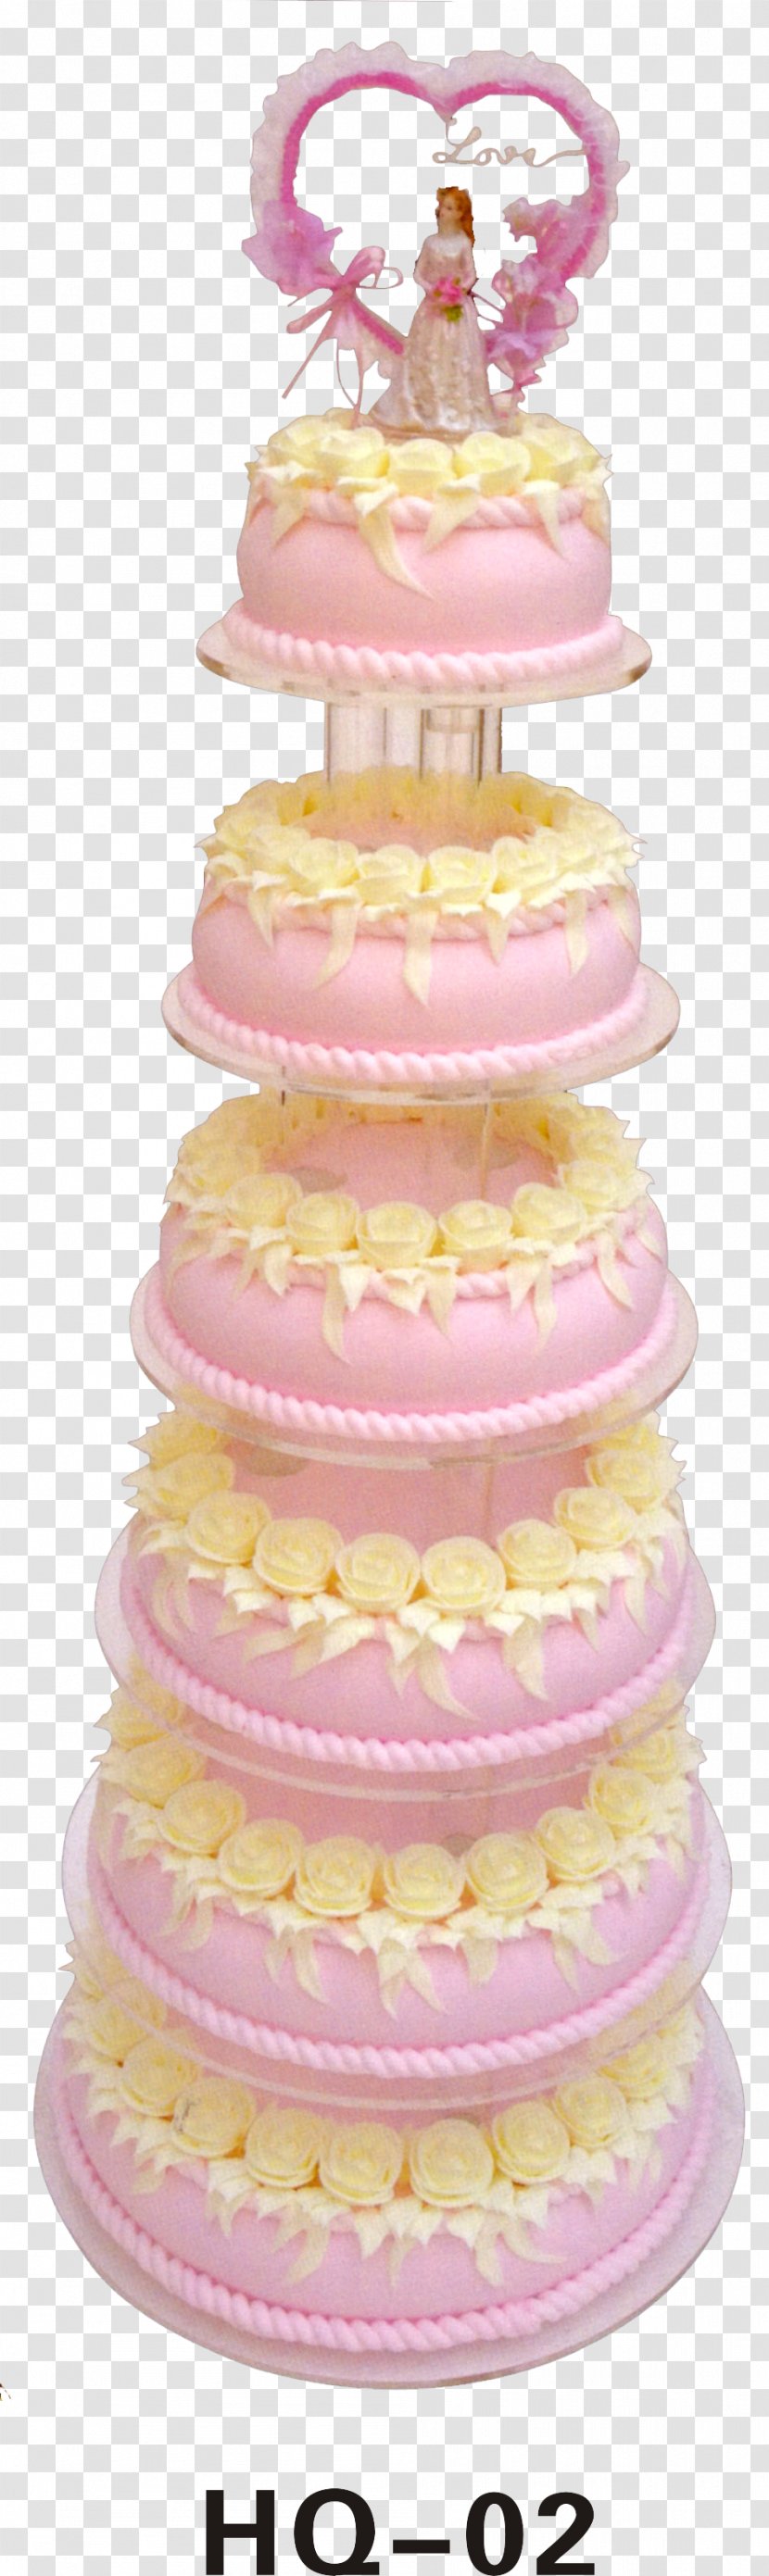 Wedding Cake Torte Layer Pastry - Sugar - Cakes Transparent PNG